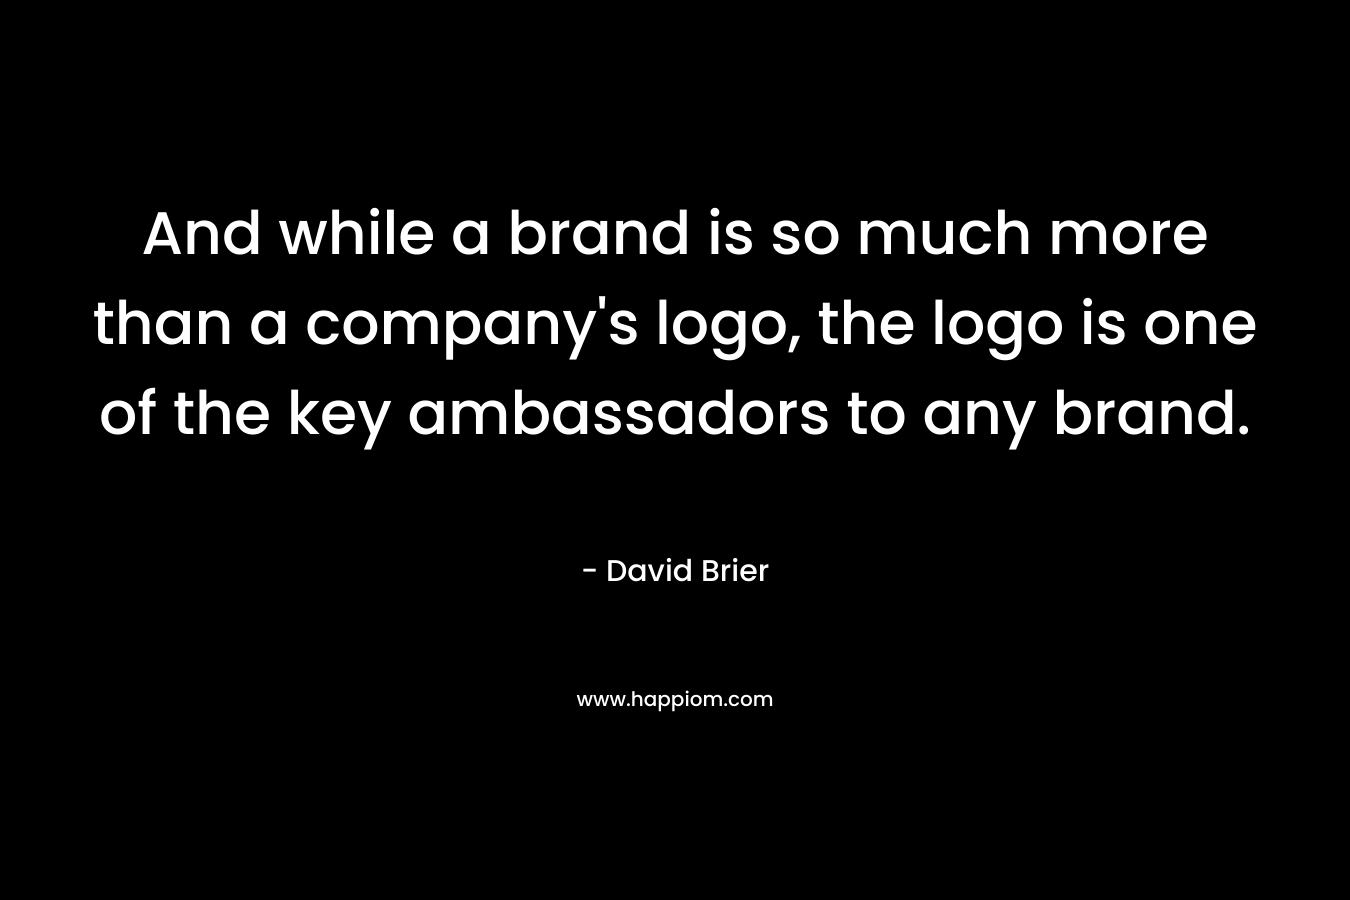 And while a brand is so much more than a company's logo, the logo is one of the key ambassadors to any brand.